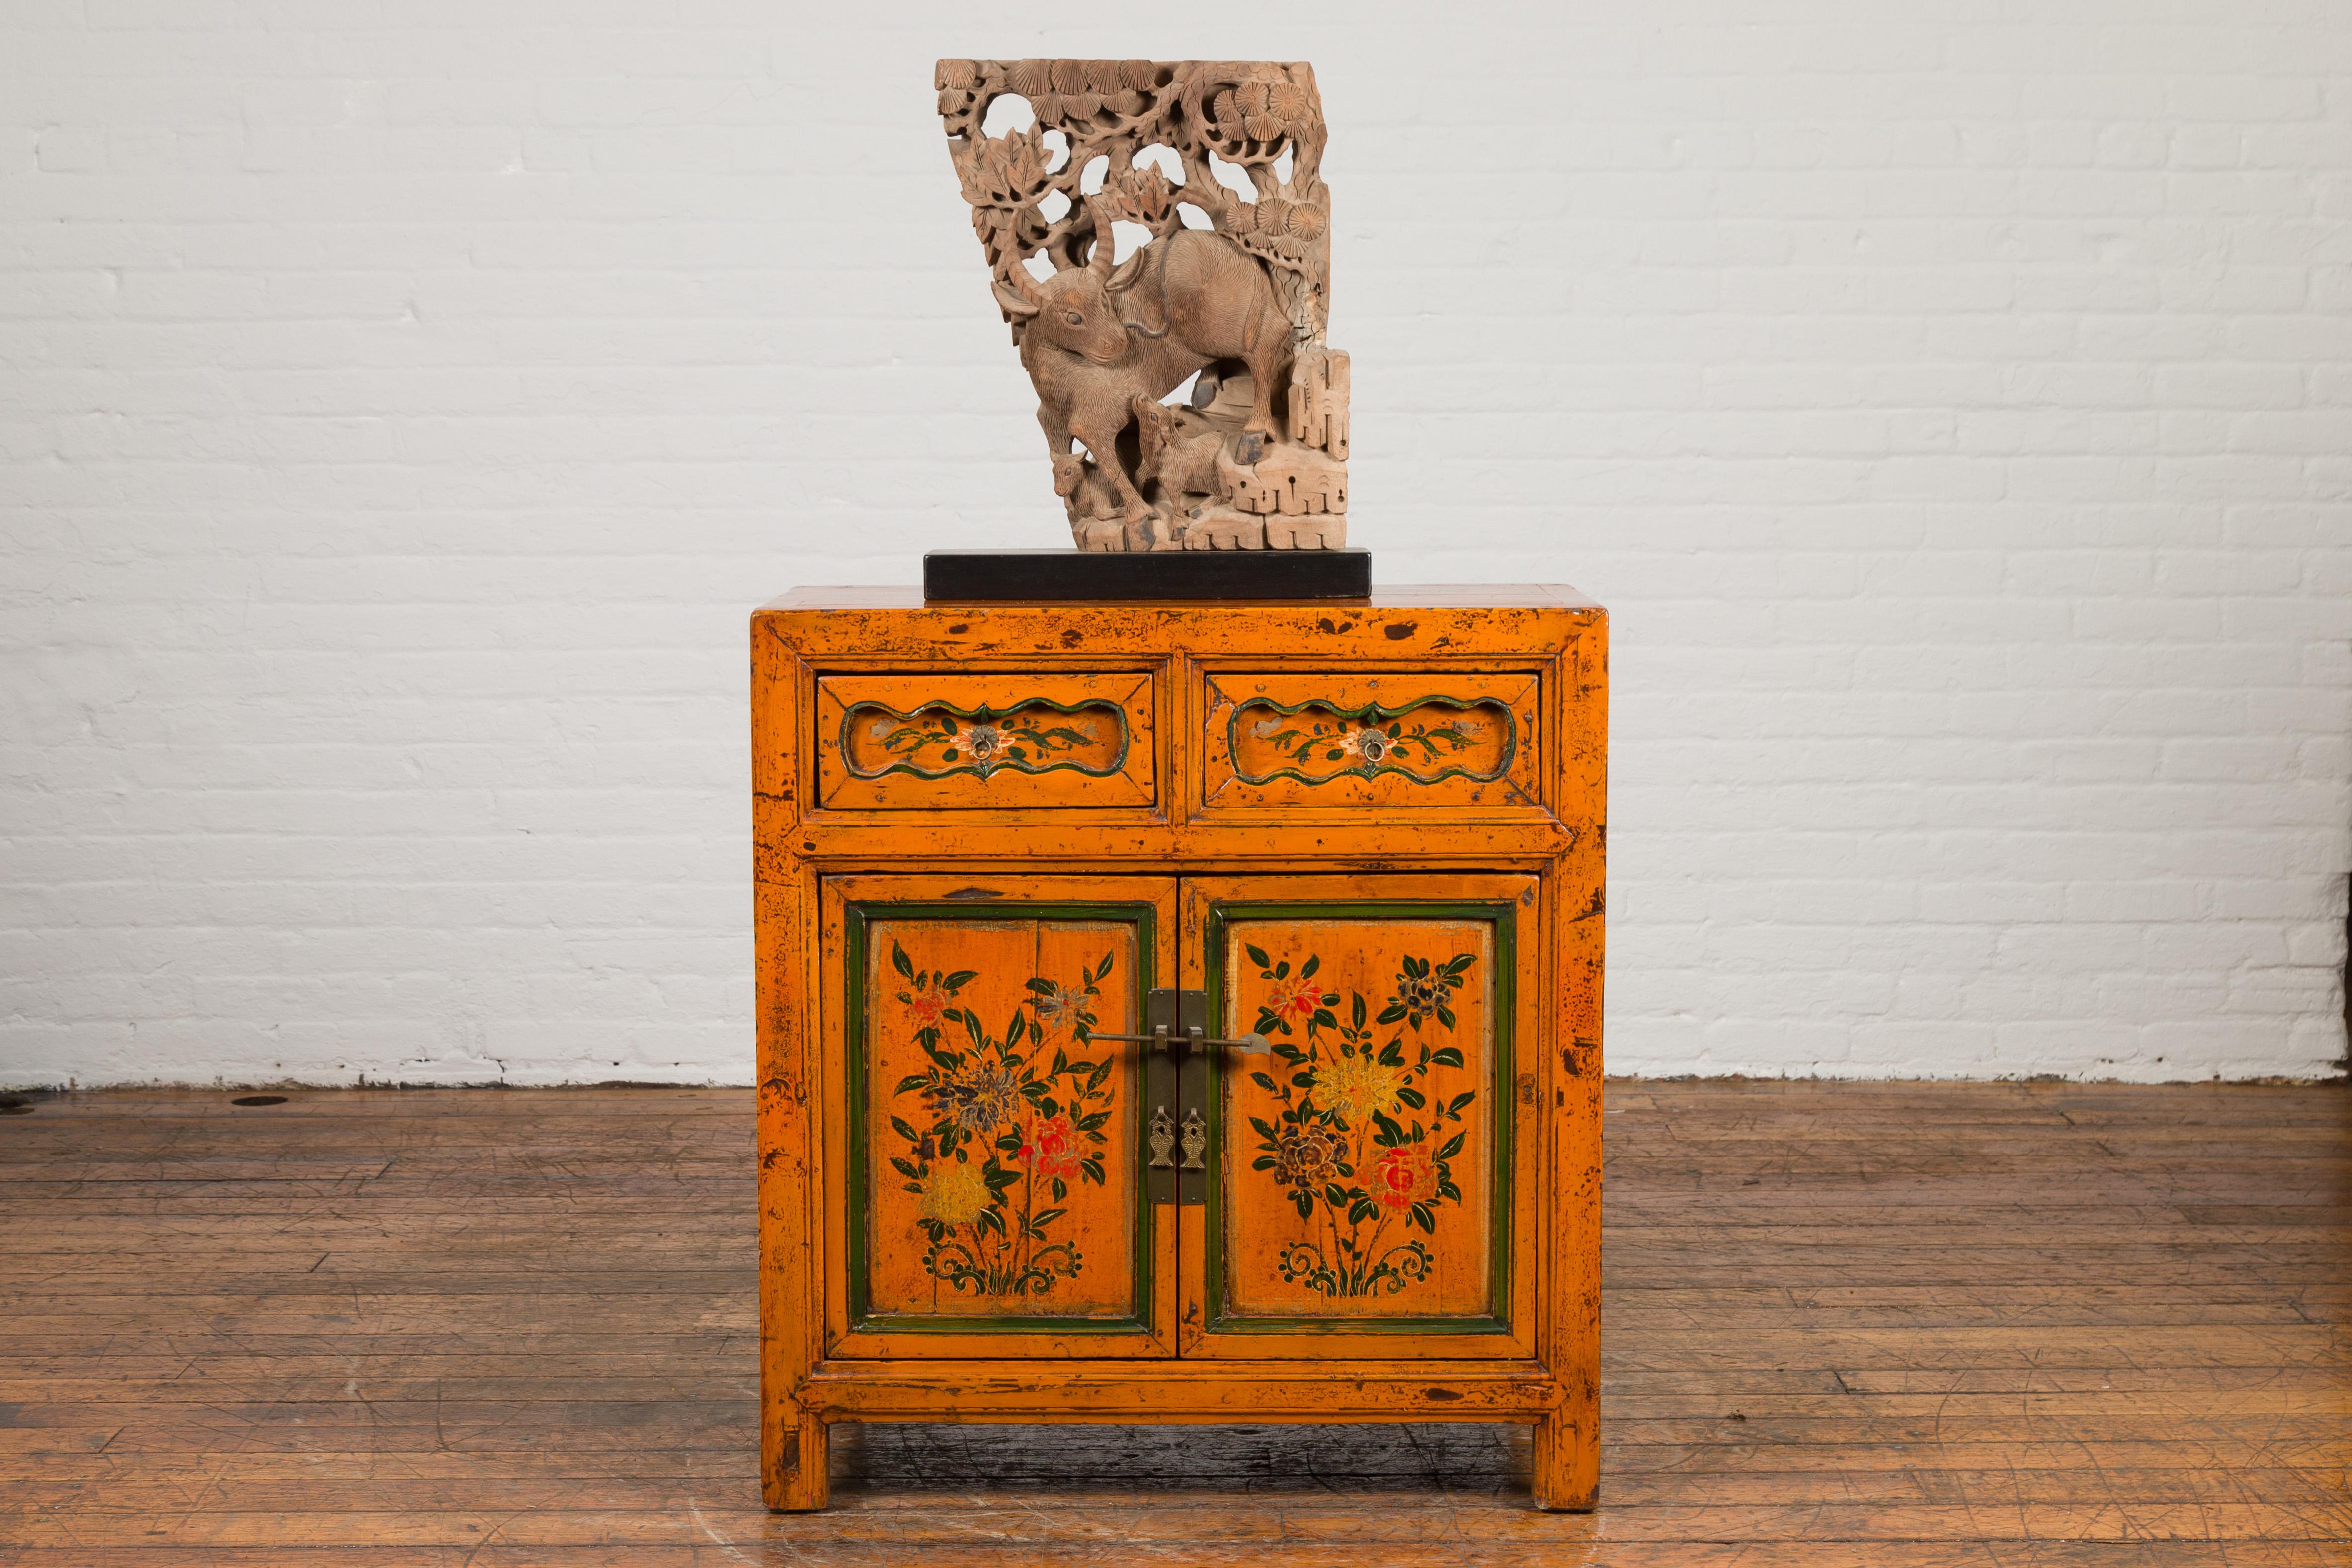 A Chinese Qing dynasty period small Gansu cabinet from the 19th century, with Tibetan style hand-painted floral decor. Created in the north central province of Gansu during the 19th century, this rectangular cabinet features two drawers above two